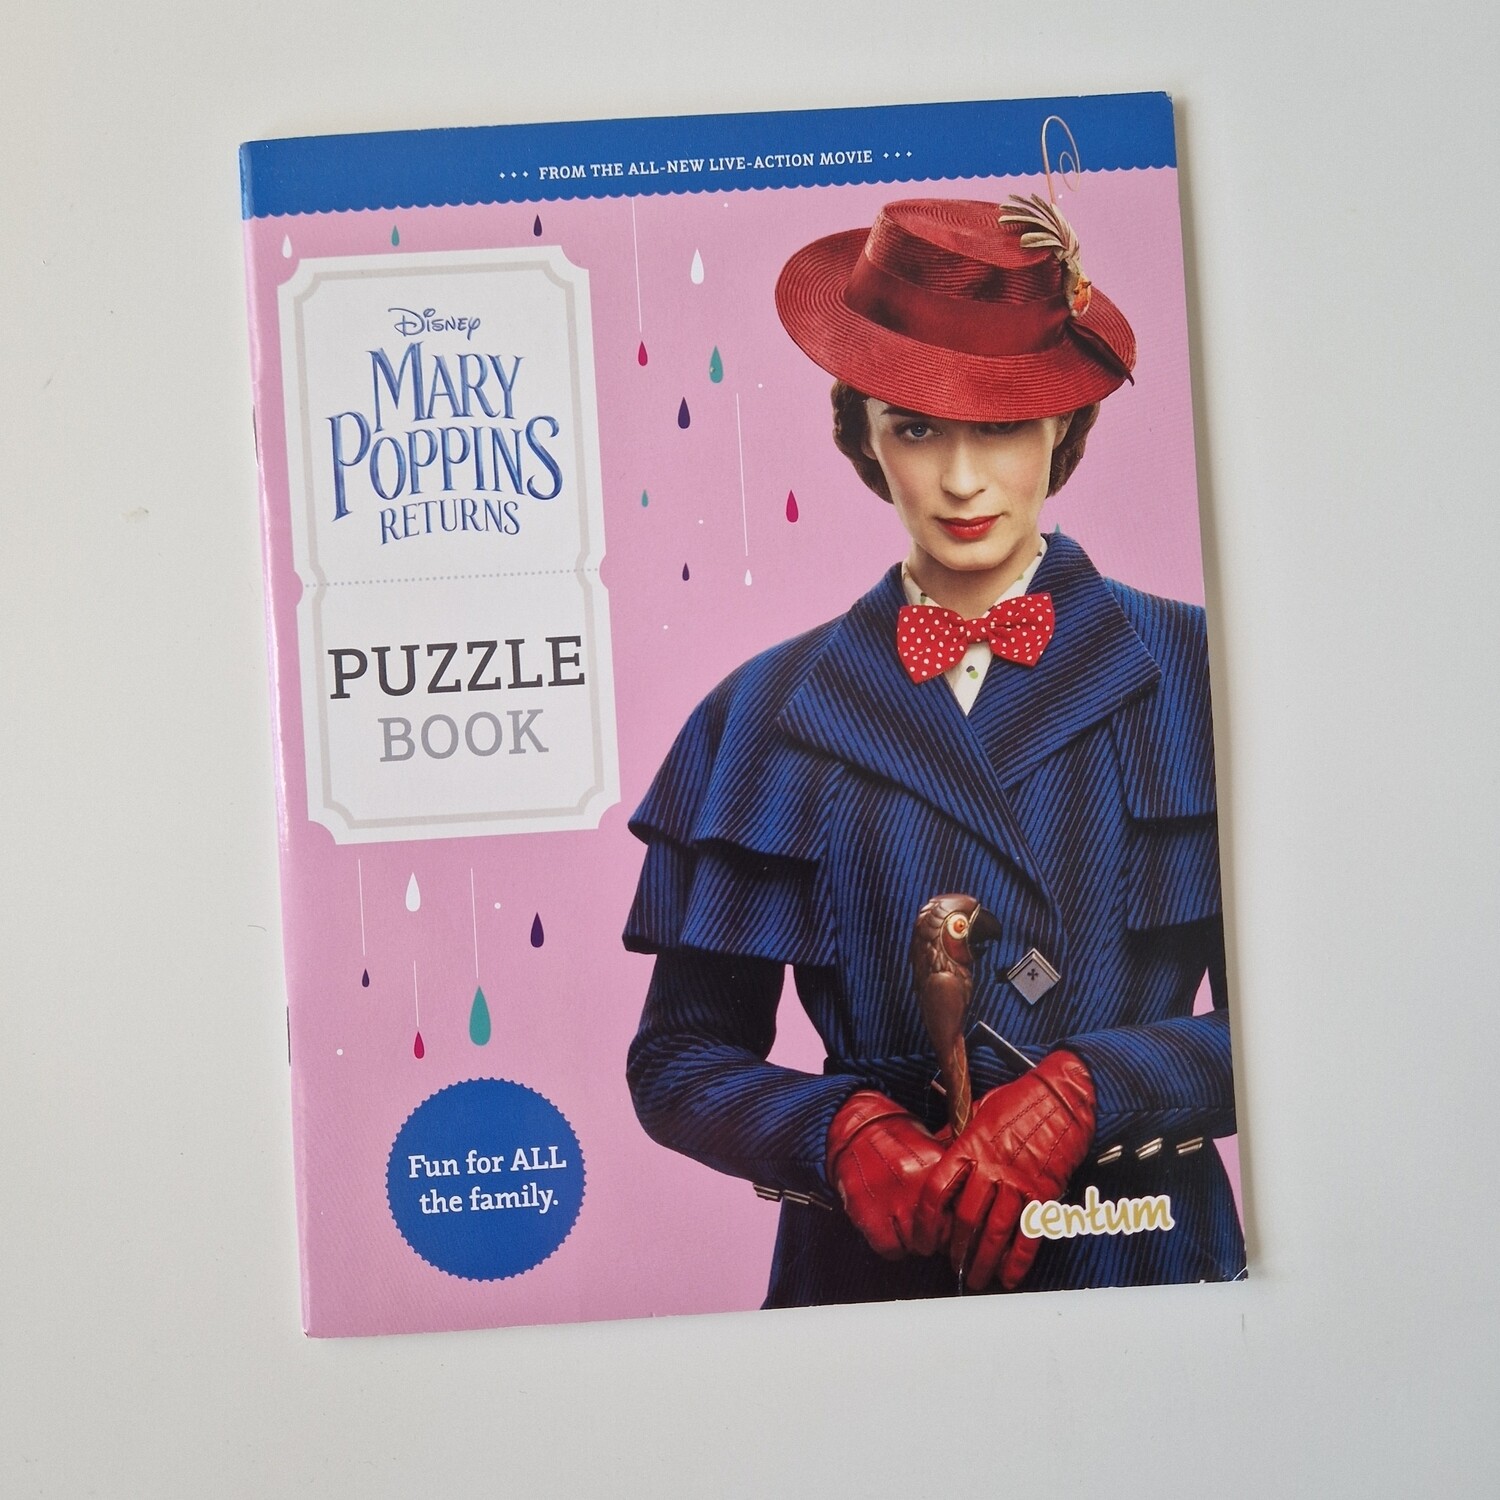 Mary Poppins Returns Notebook - made from a paperback book